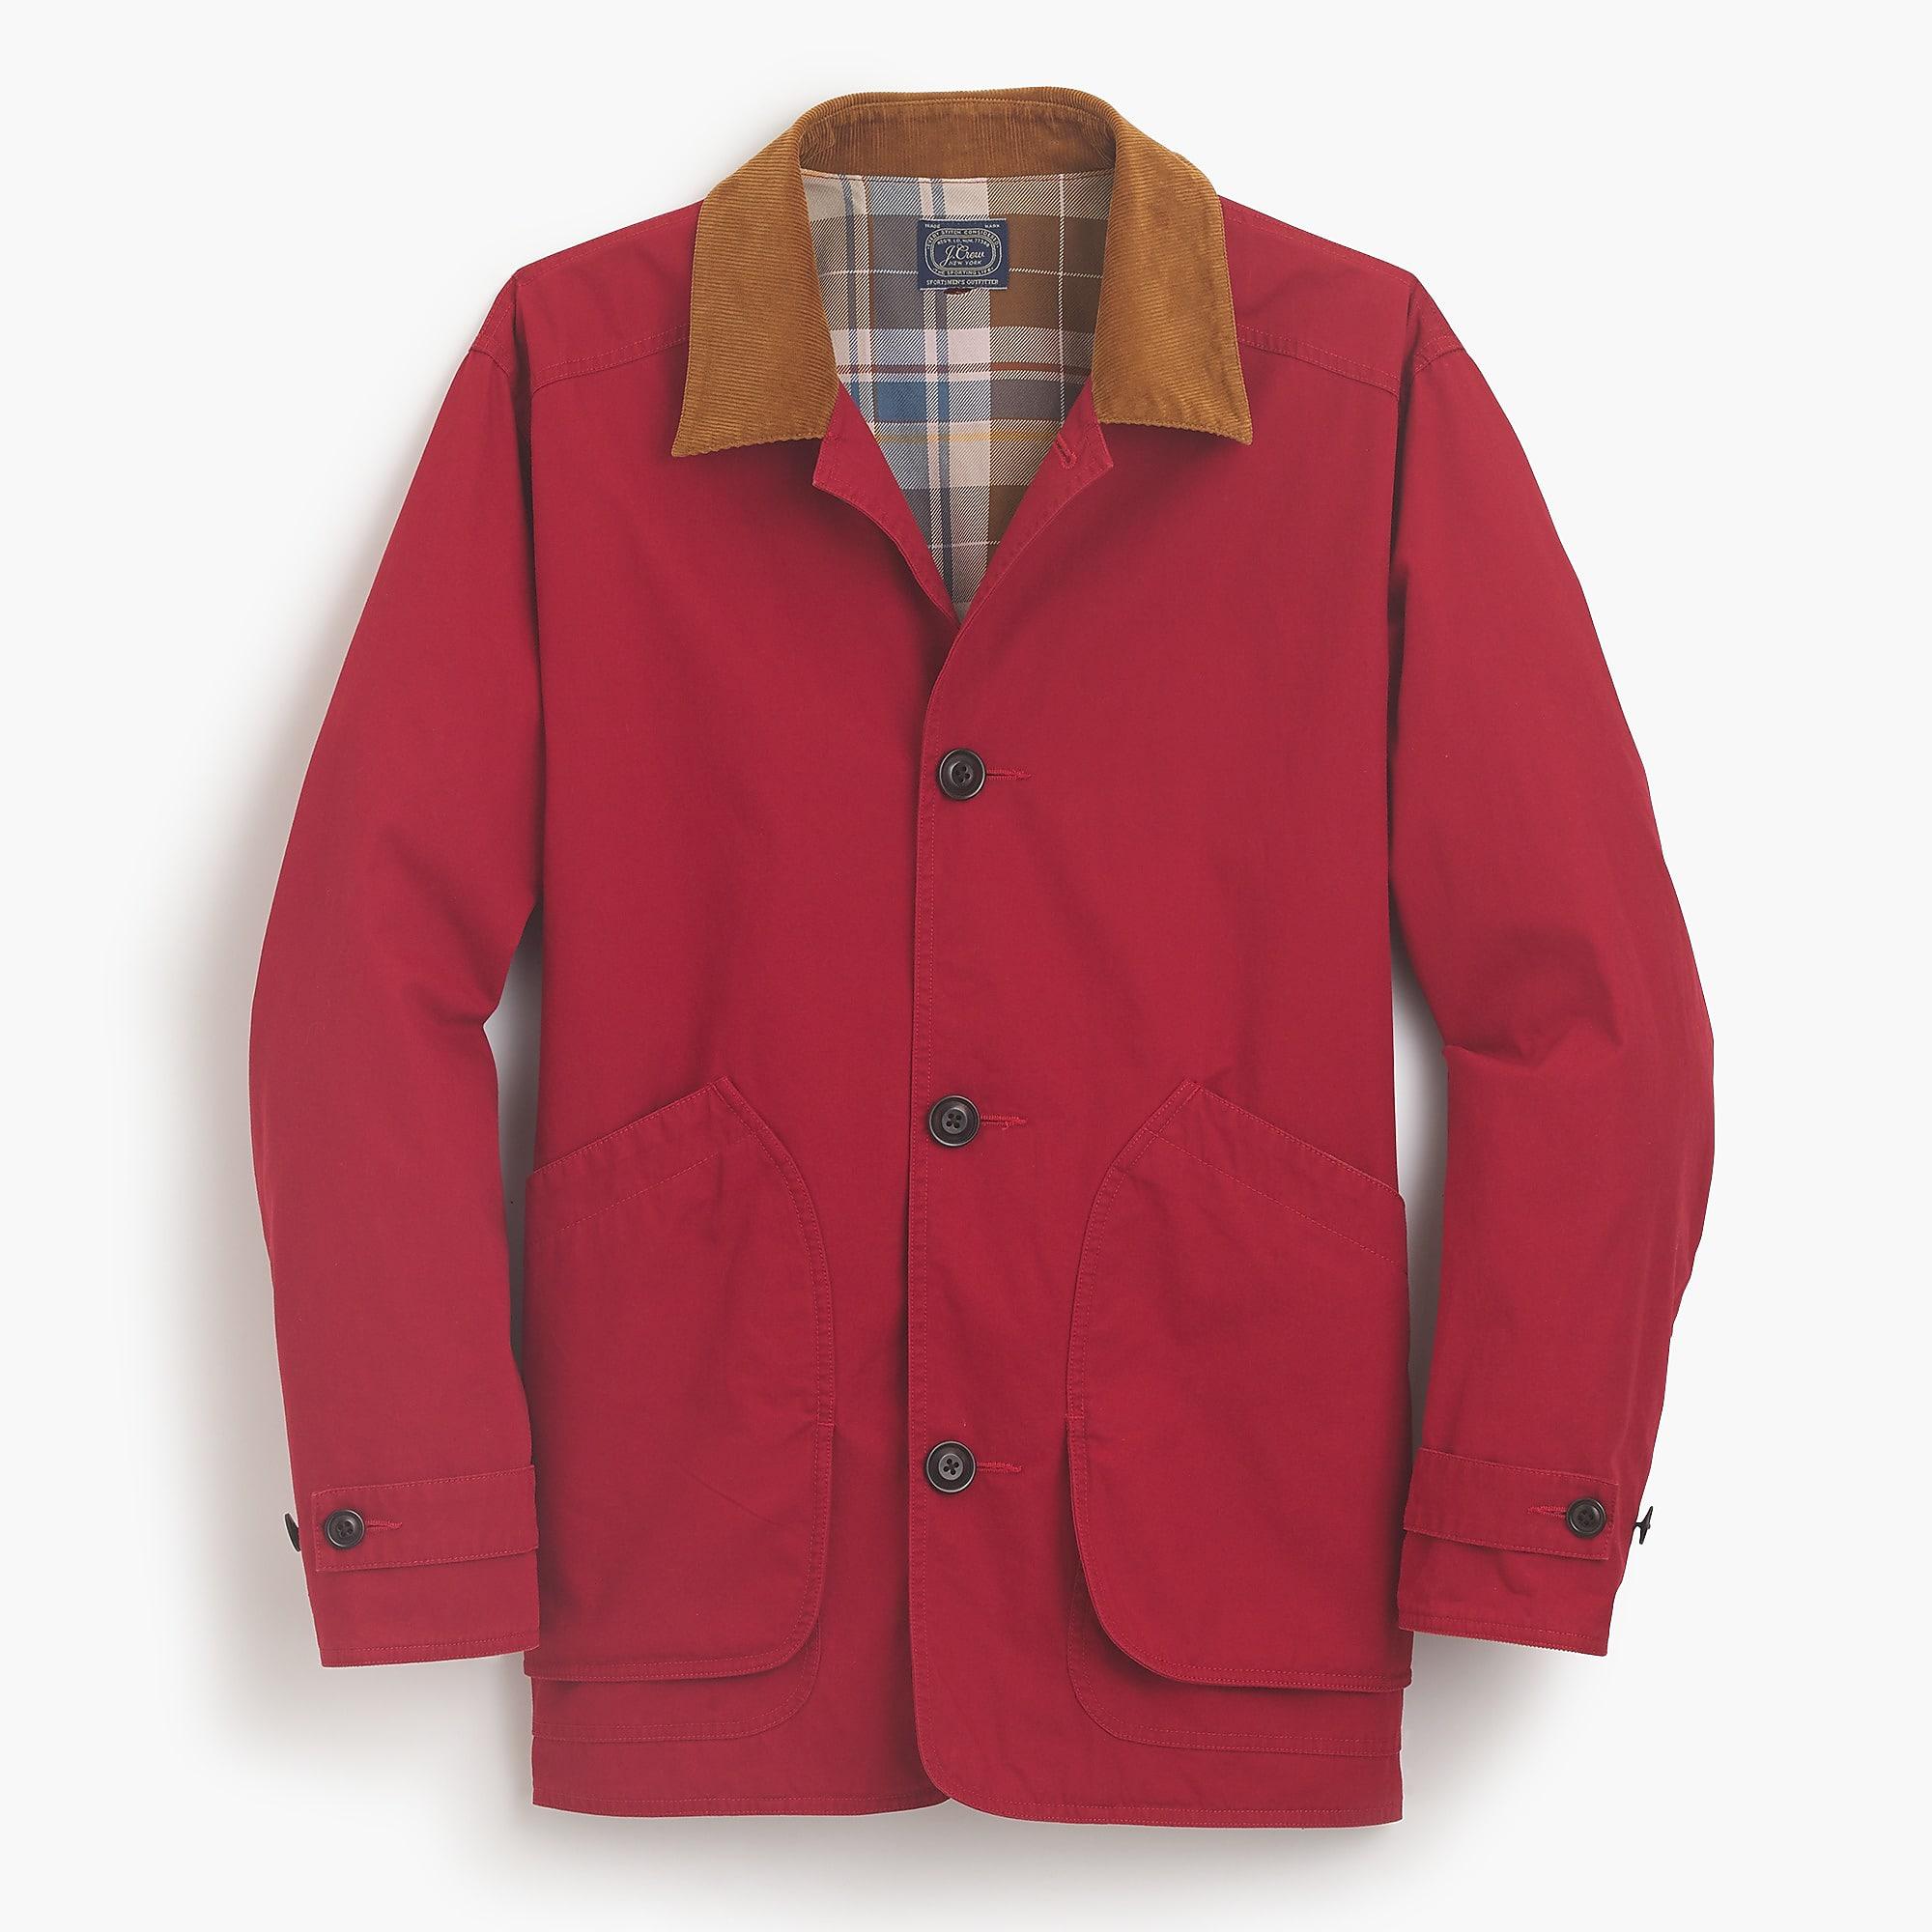 J.Crew Cotton Unisex 1983 Barn Jacket in Red for Men - Lyst